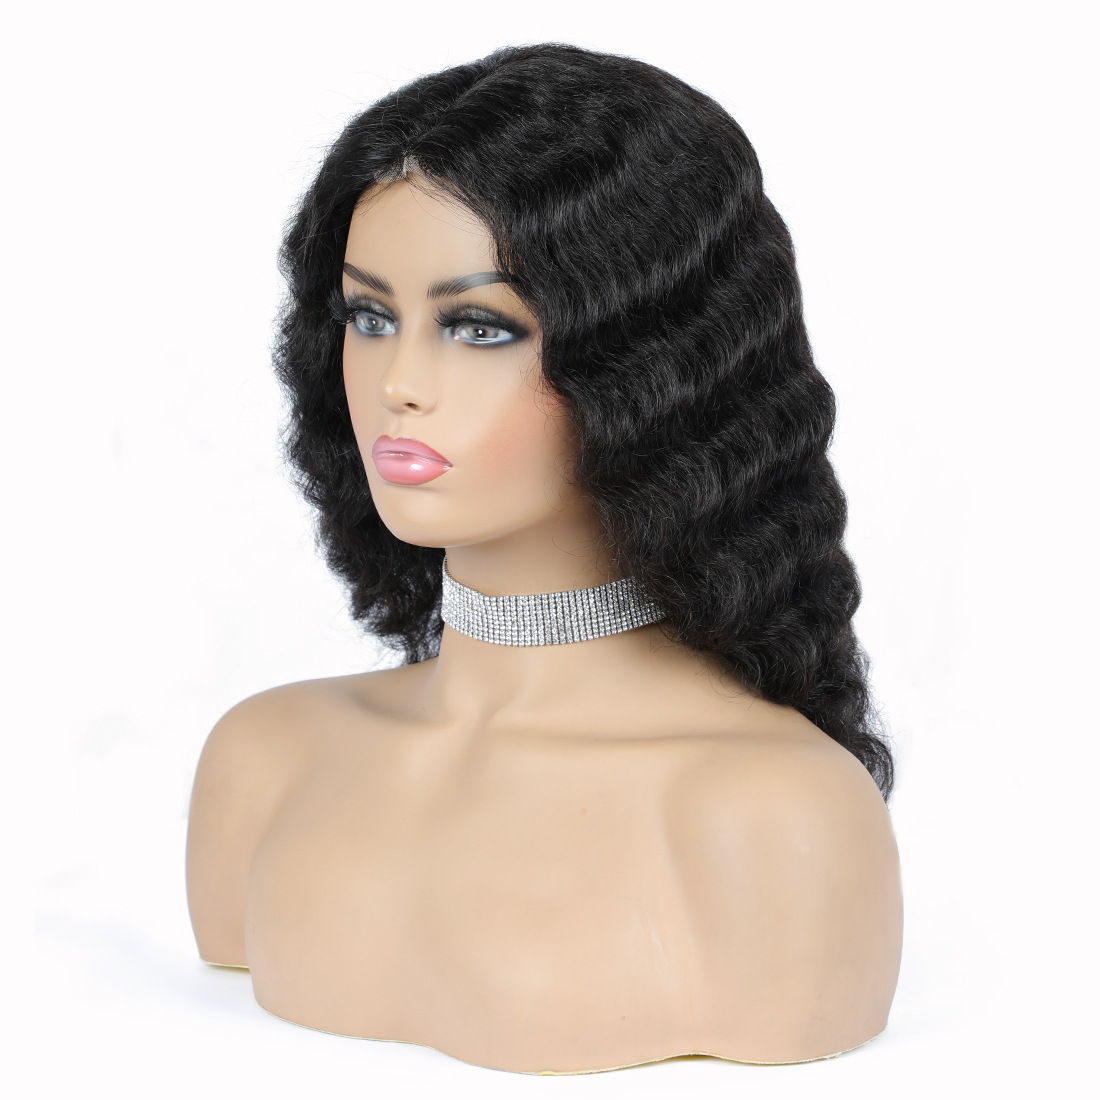 2021 new real-life wig water ripple qcea...